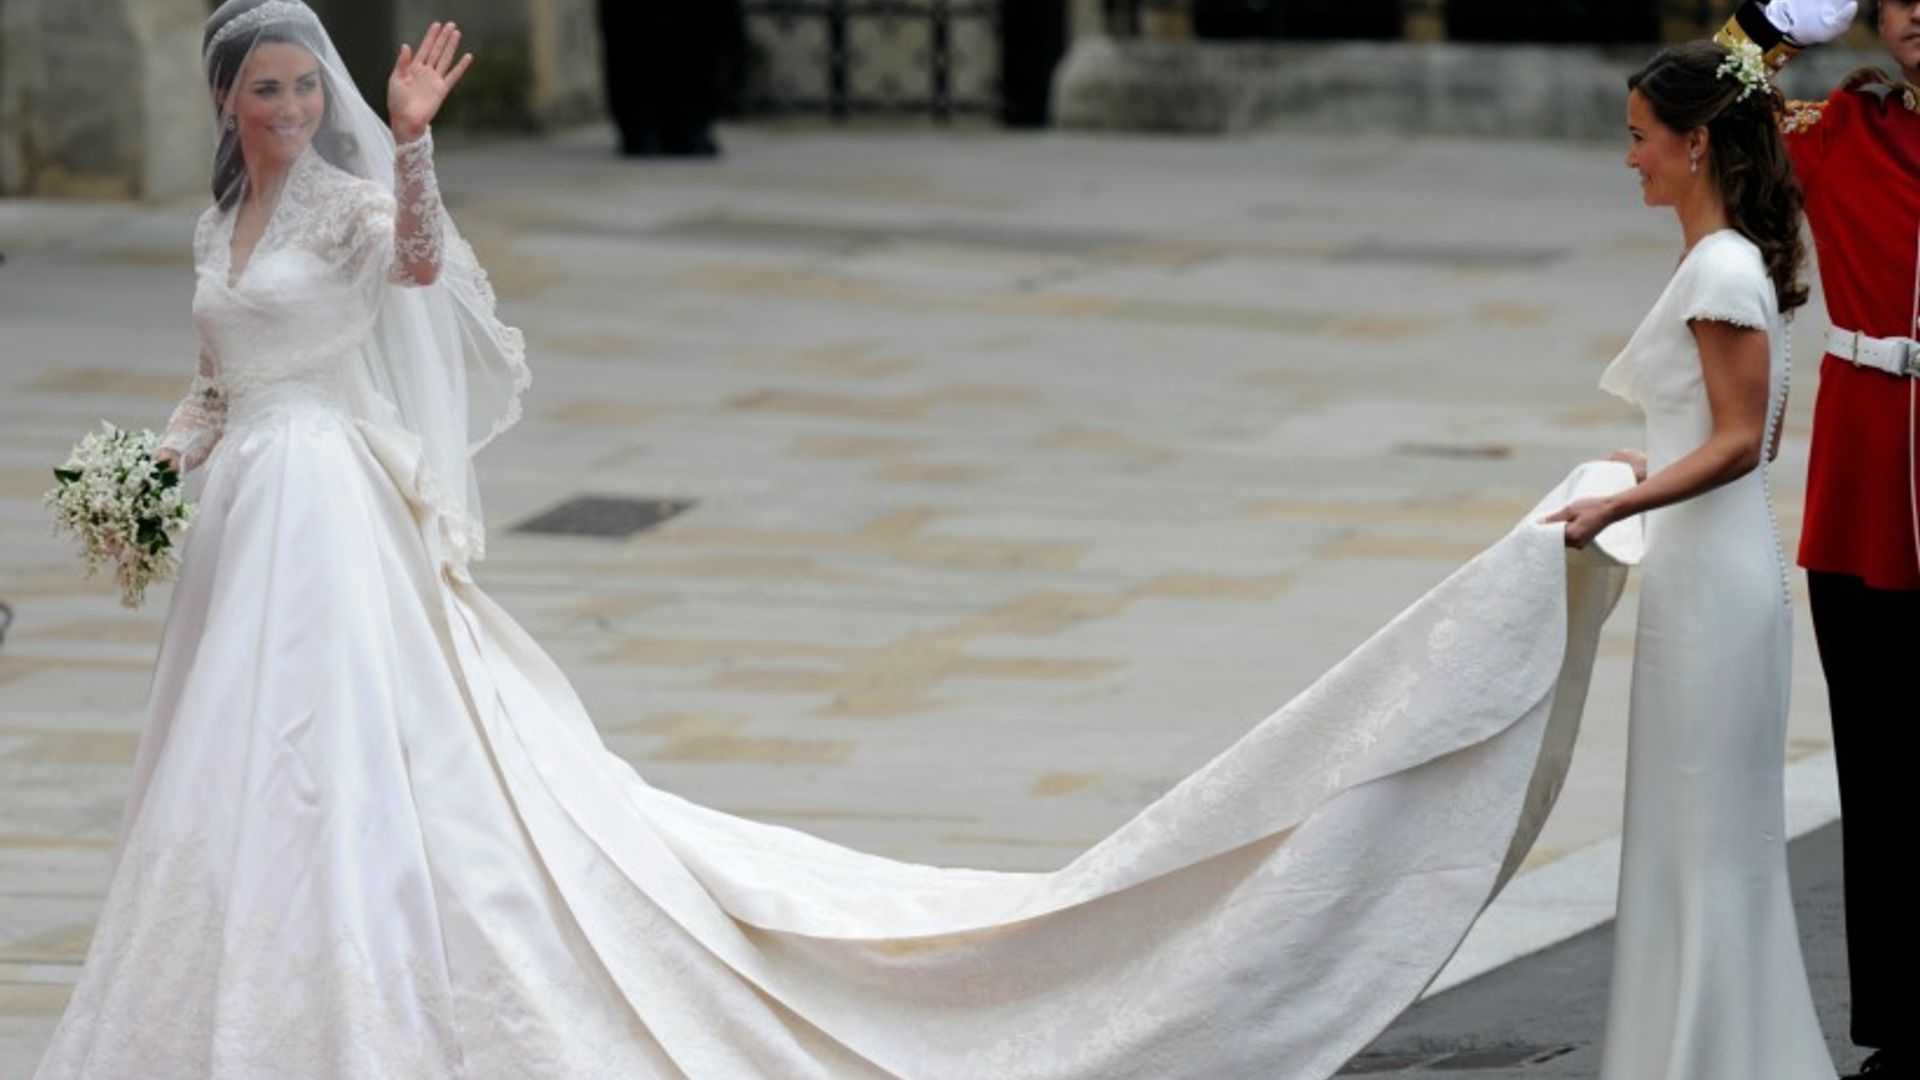 15 of the most famous royal and celebrity wedding dresses of all time